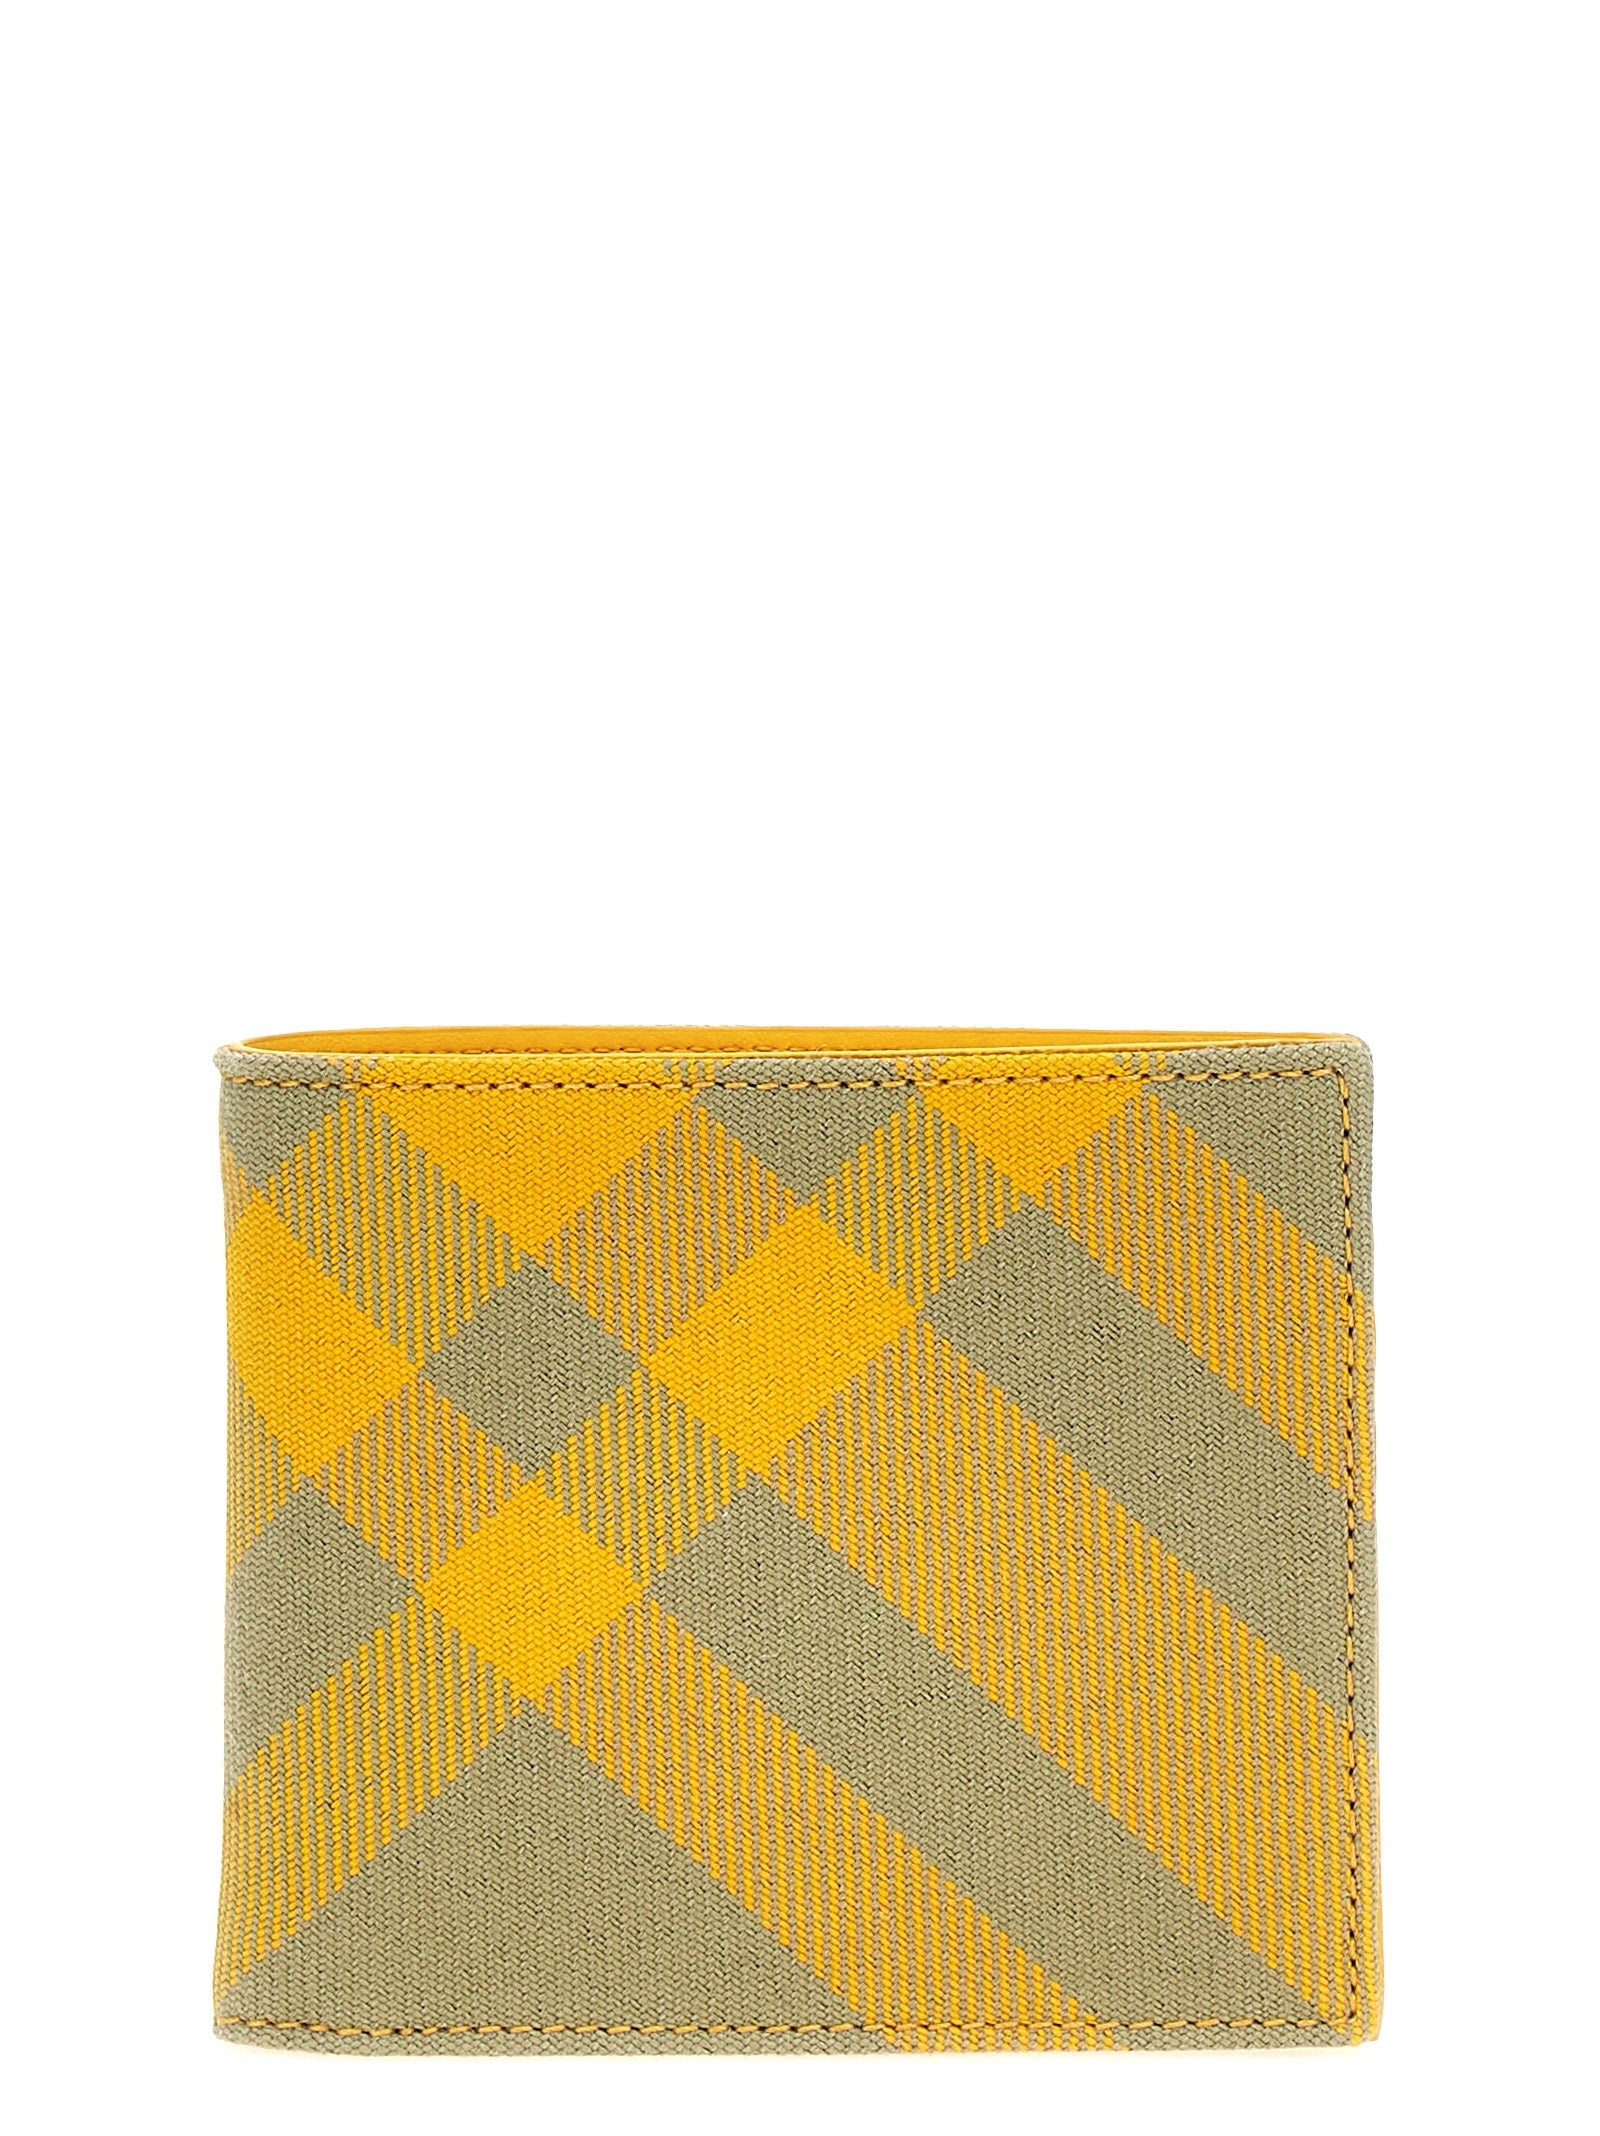 Burberry Check Wallet - 1